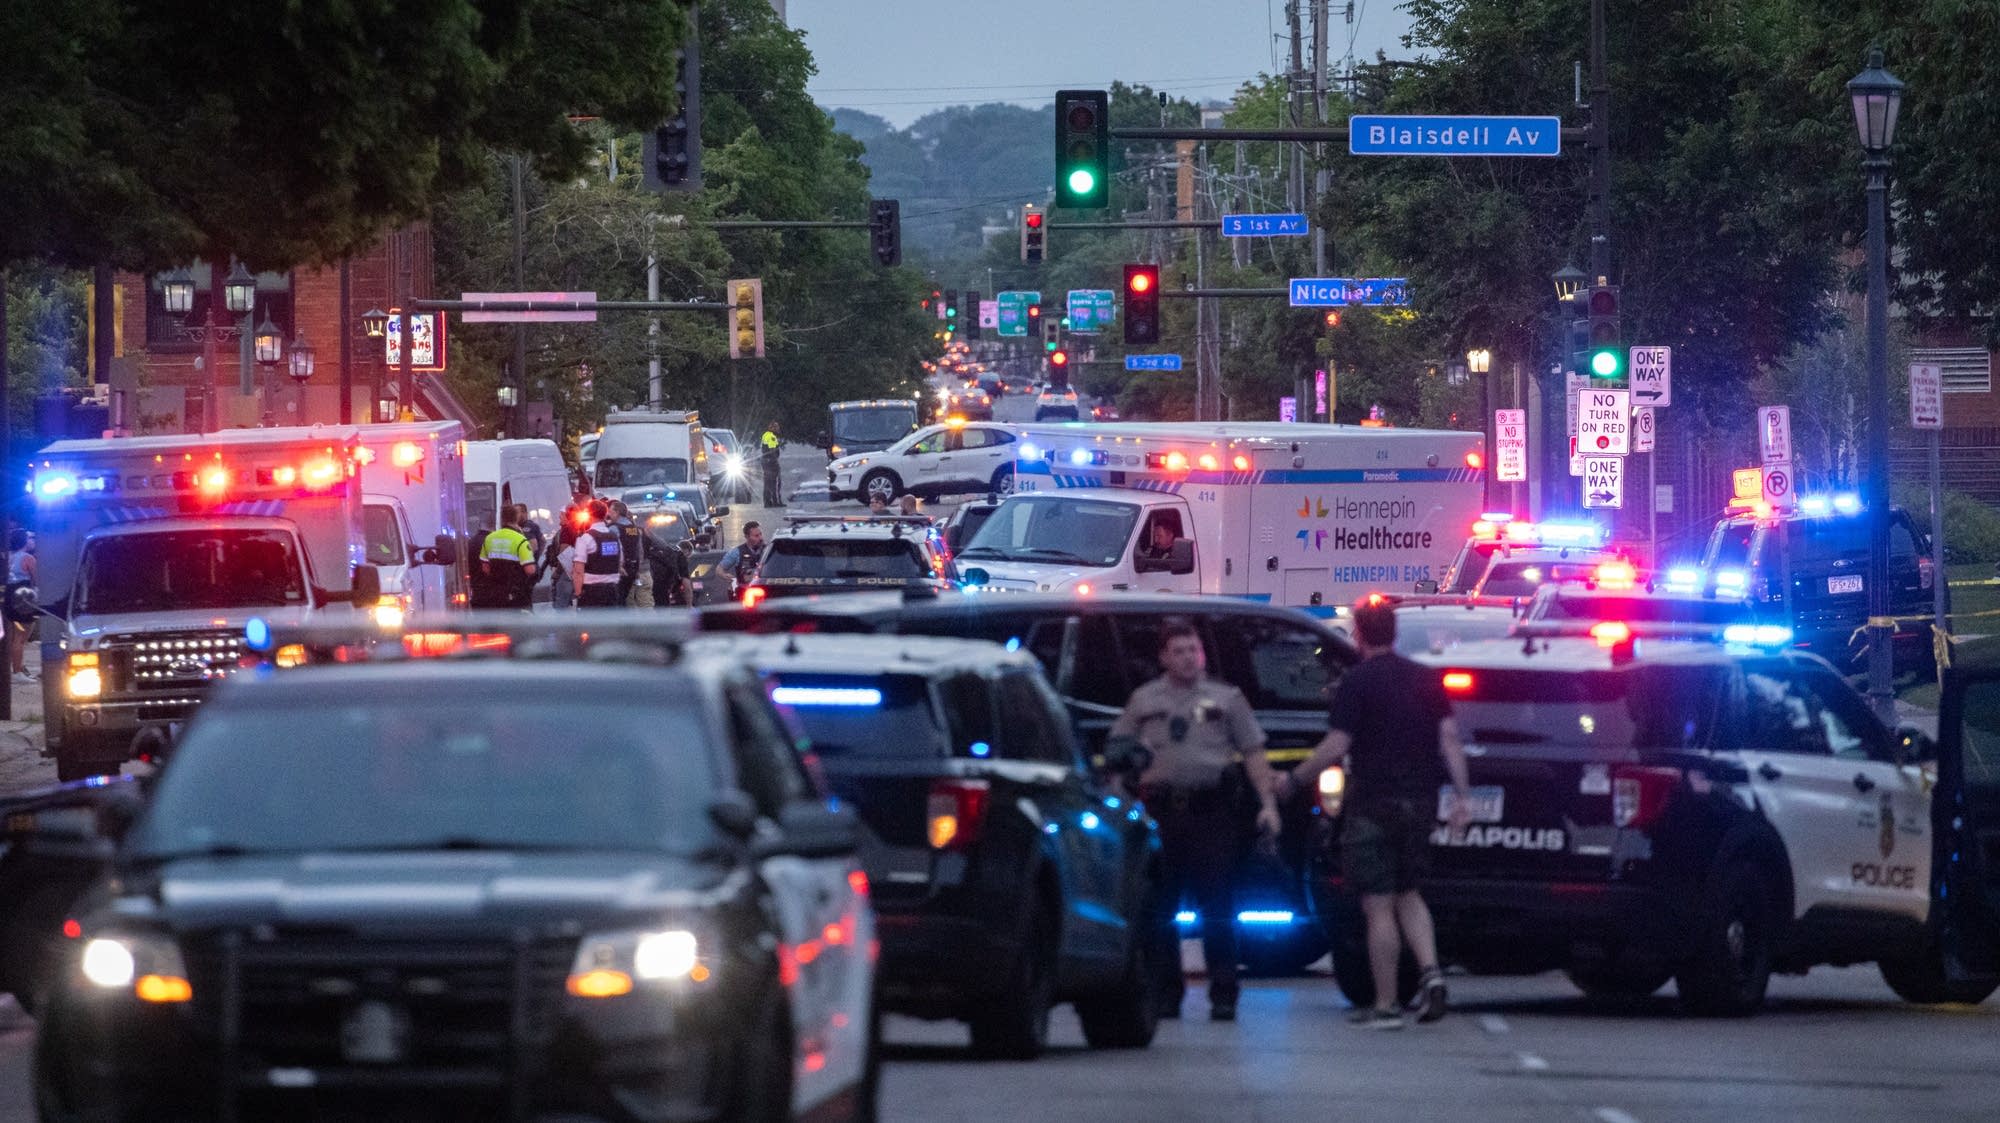 Chaotic south Minneapolis shooting leaves at least 3 dead including officer, suspect